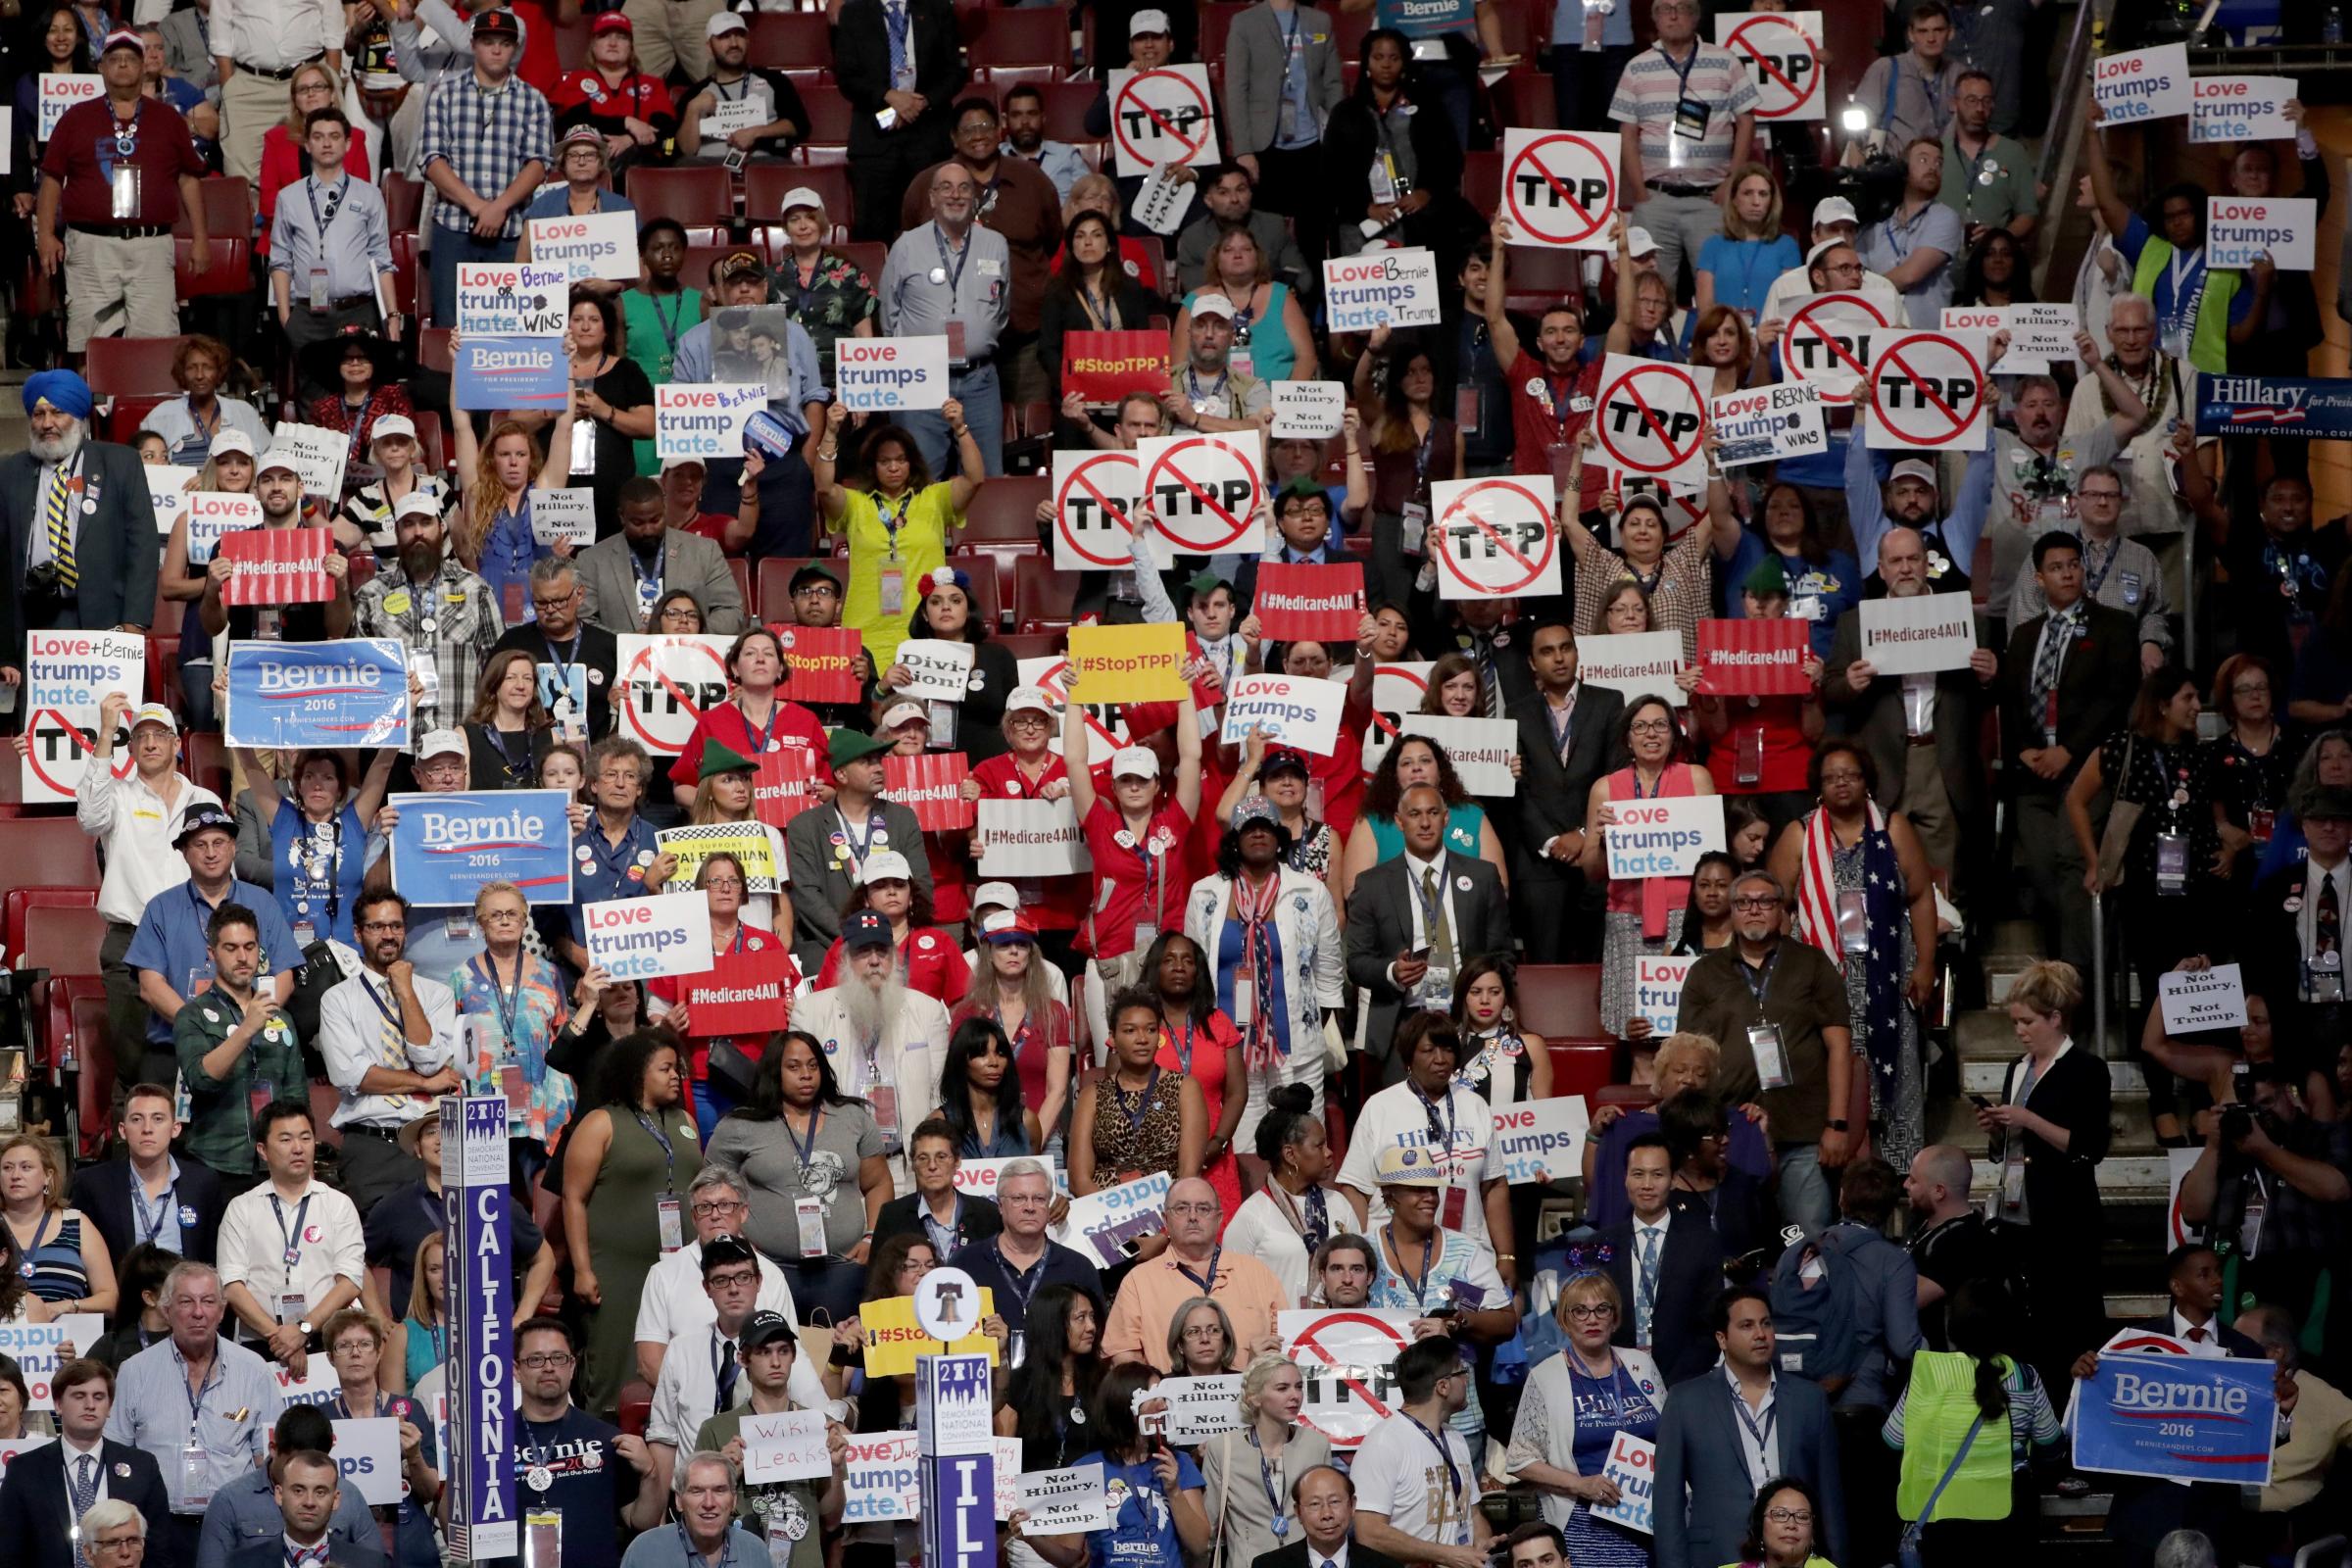 Delegates and attendees in support of Sen. Bernie Sanders (I-VT) hold up signs on the first day of the Democratic National Convention at the Wells Fargo Center, July 25, 2016 in Philadelphia.